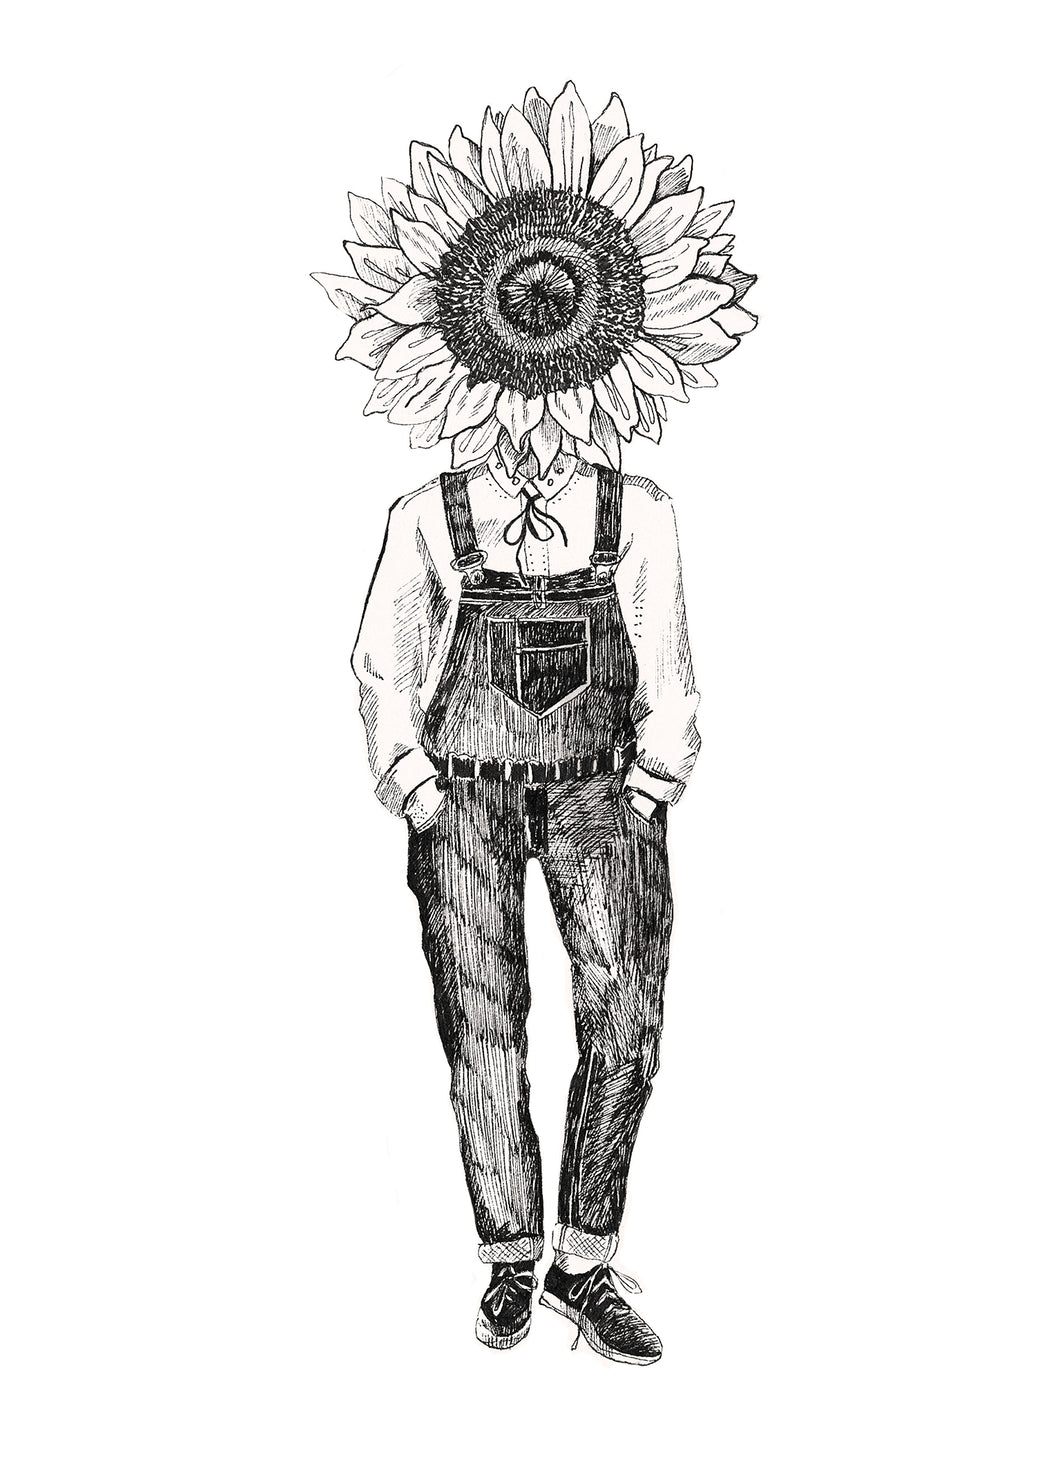 Sunflower Greeting Card - About Face Illustration